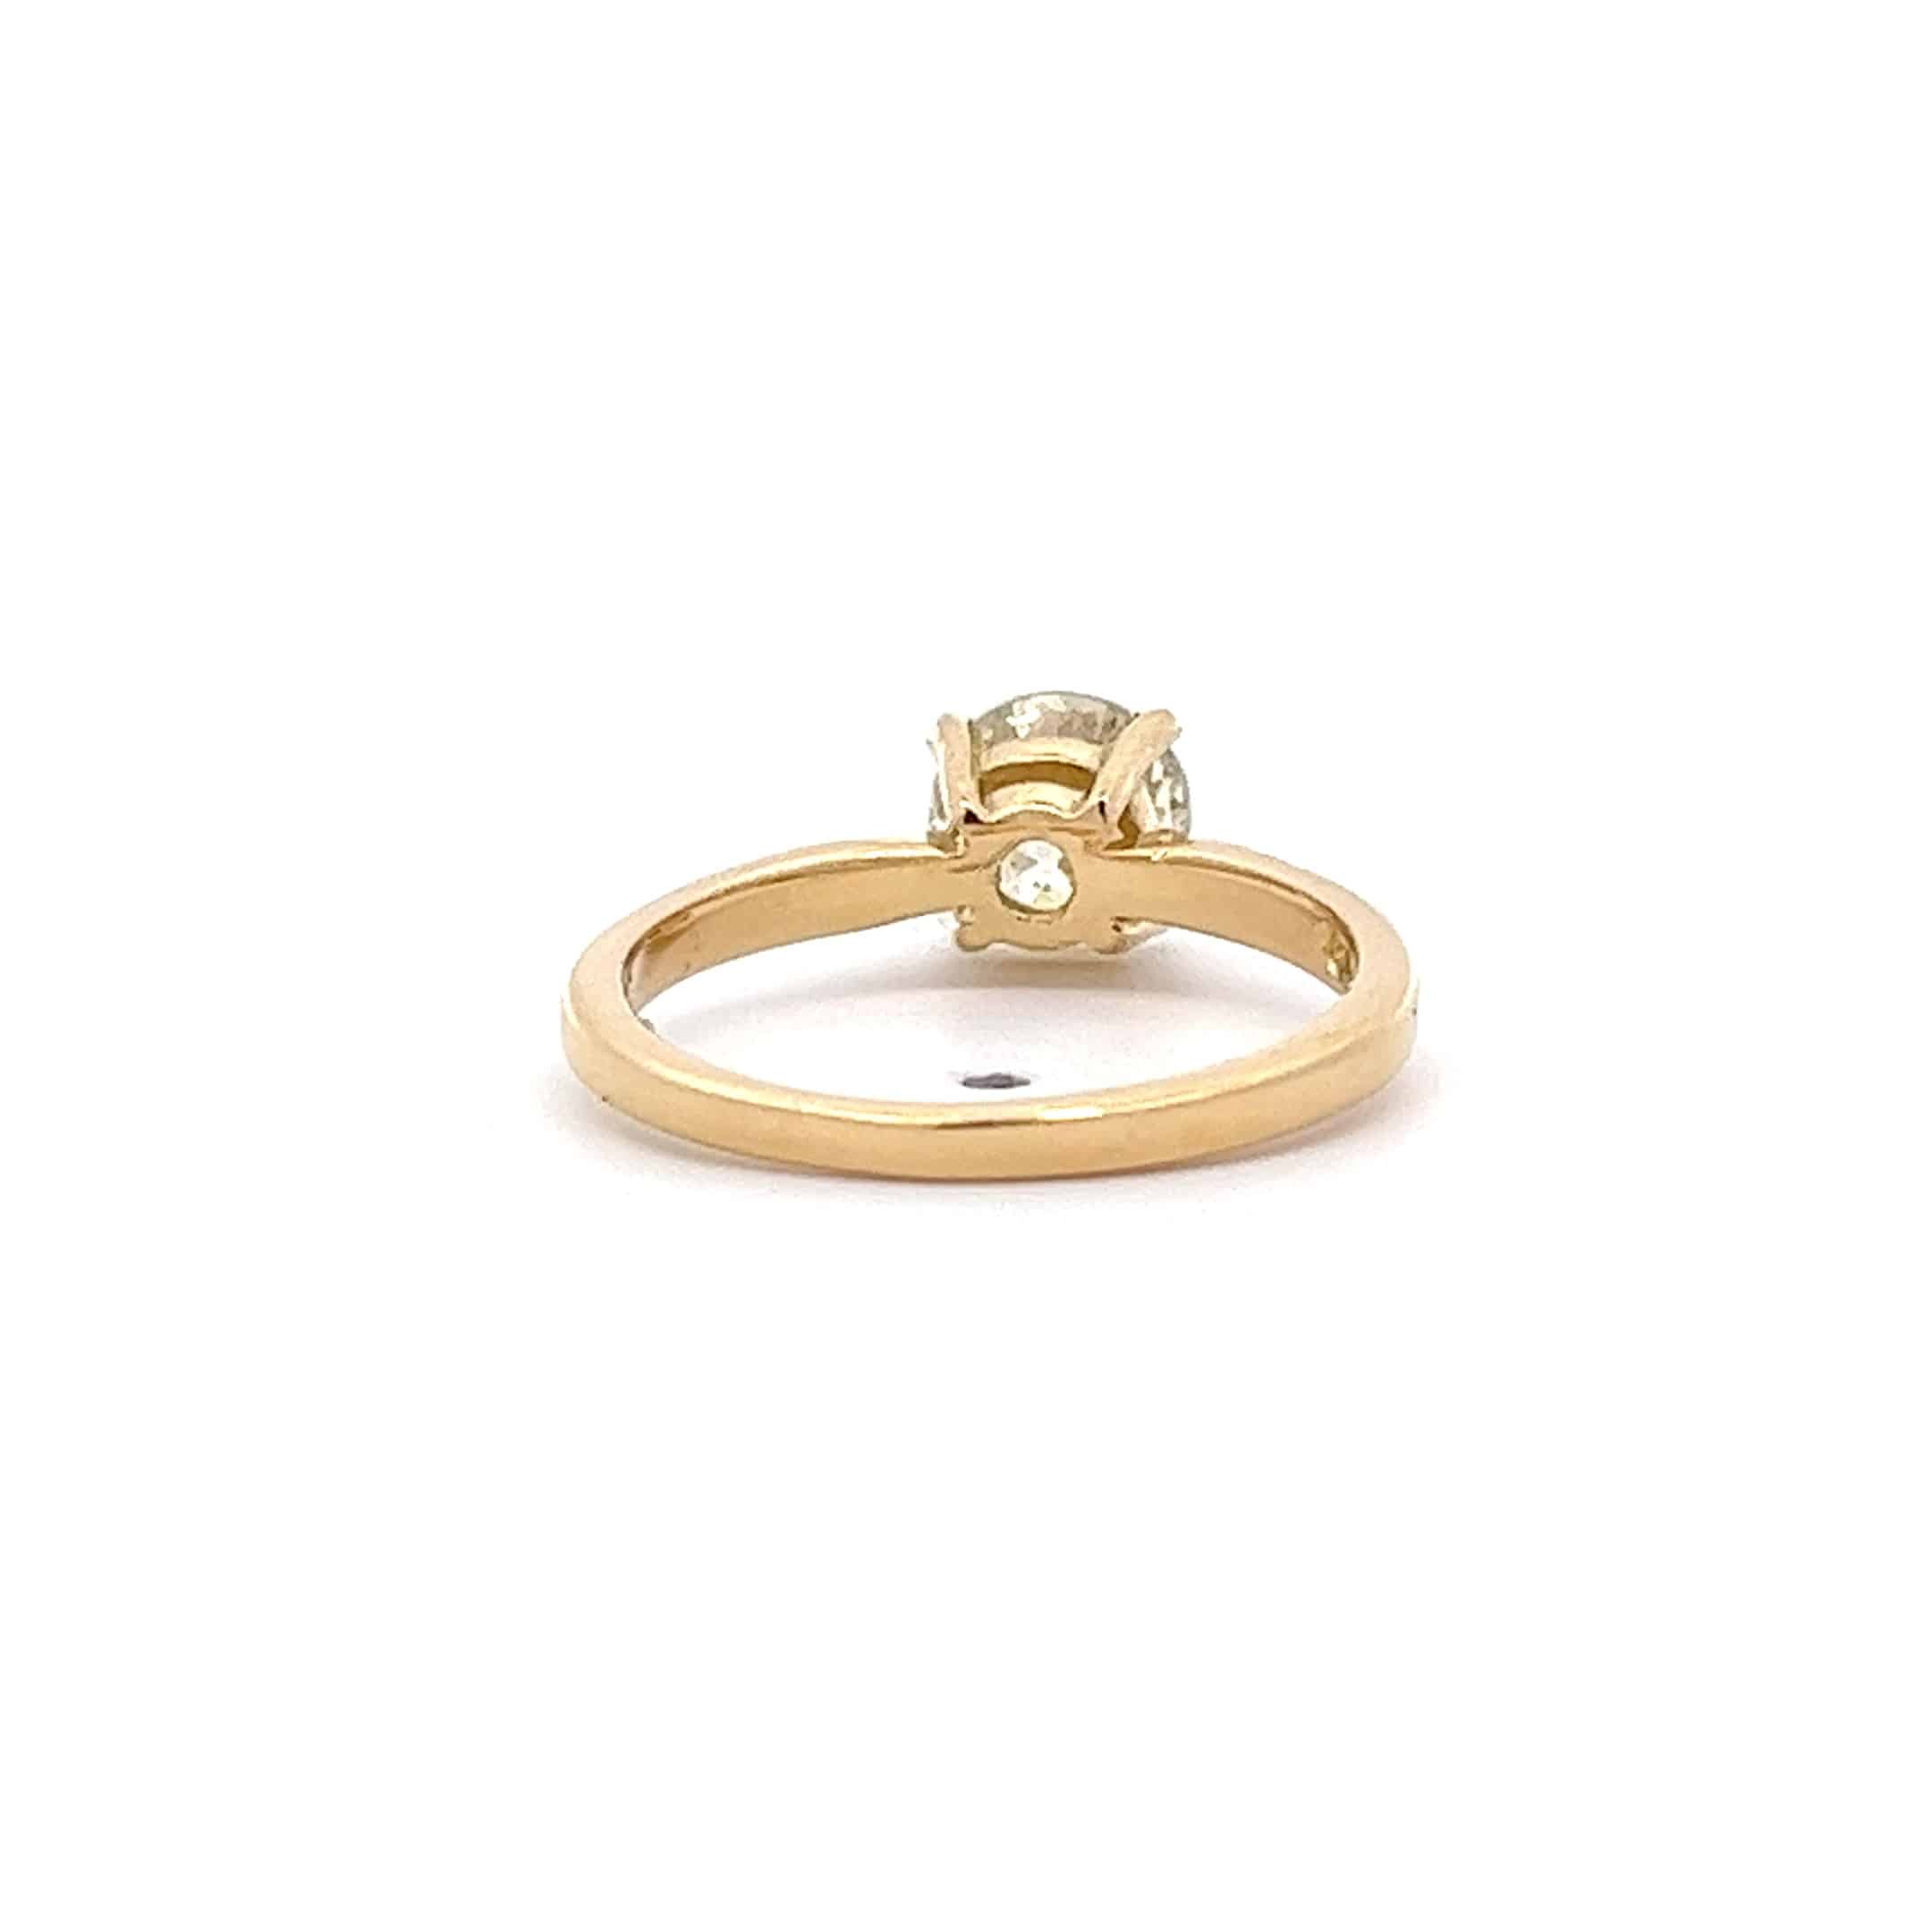 0.85ct Brilliant Cut Diamond Solitaire Ring in 18ct Yellow Gold – Pre-Owned